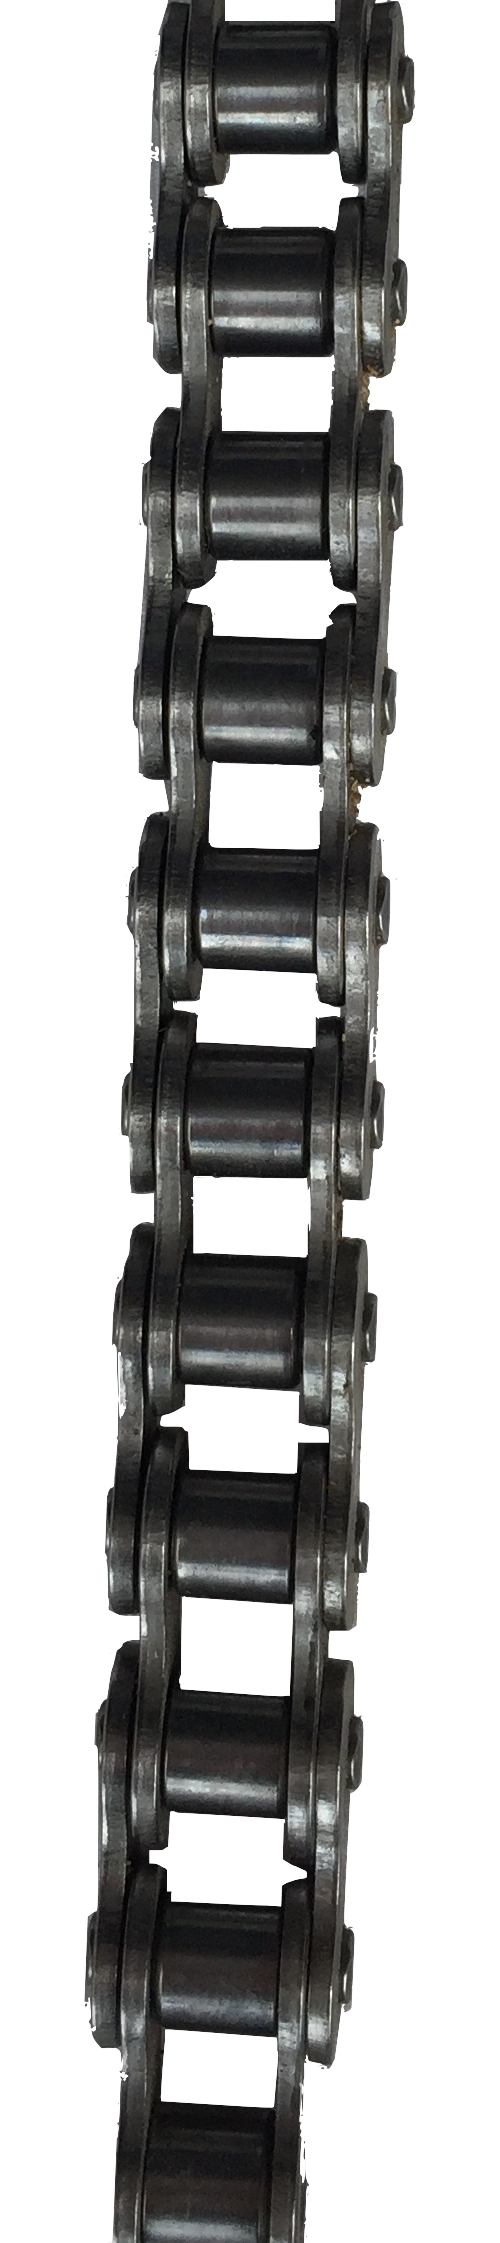 HKK #60 Aqua Series Standard Riveted Roller Chain (0.750" Pitch) - SOLD BY THE FOOT - Froedge Machine & Supply Co., Inc.